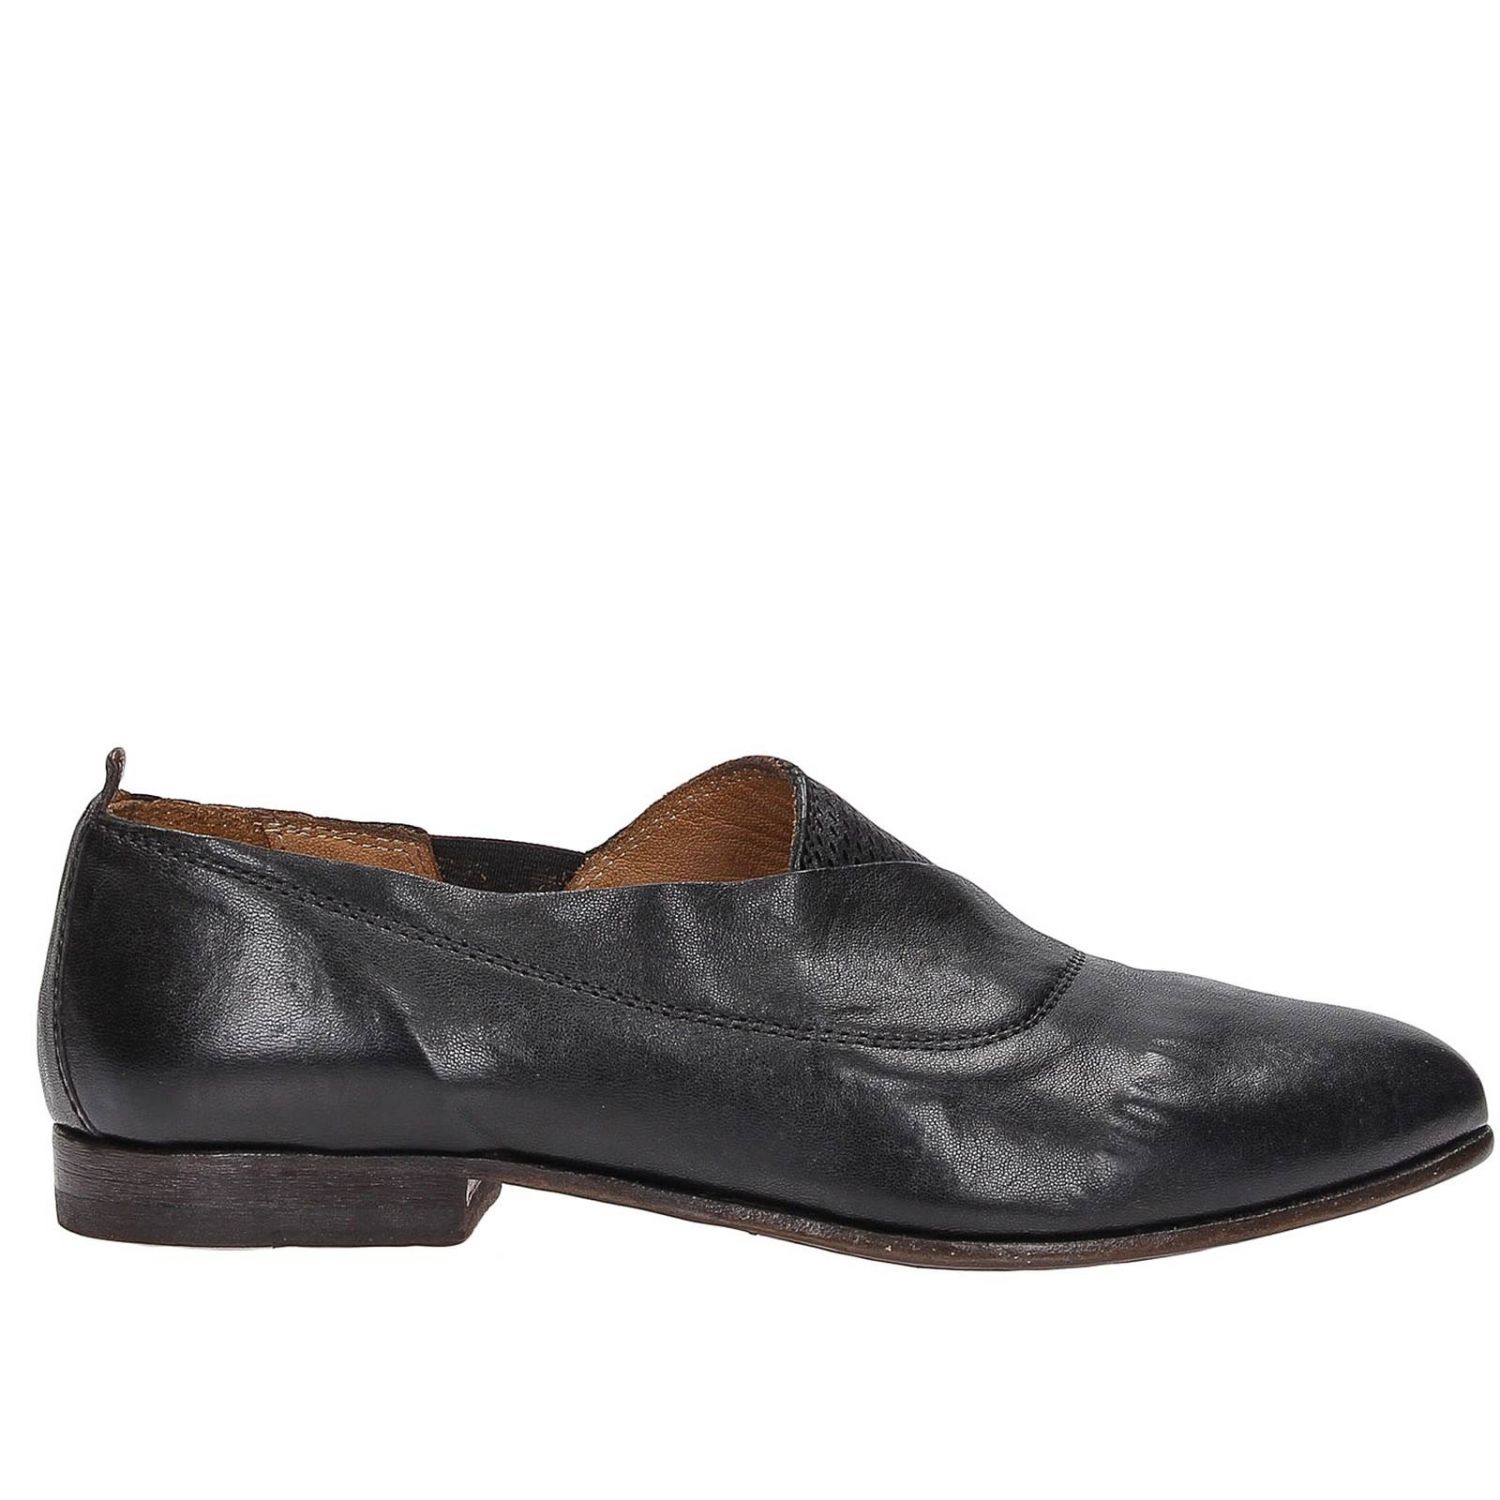 Moma Outlet: Shoes women | Flat Shoes Moma Women Black | Flat Shoes ...